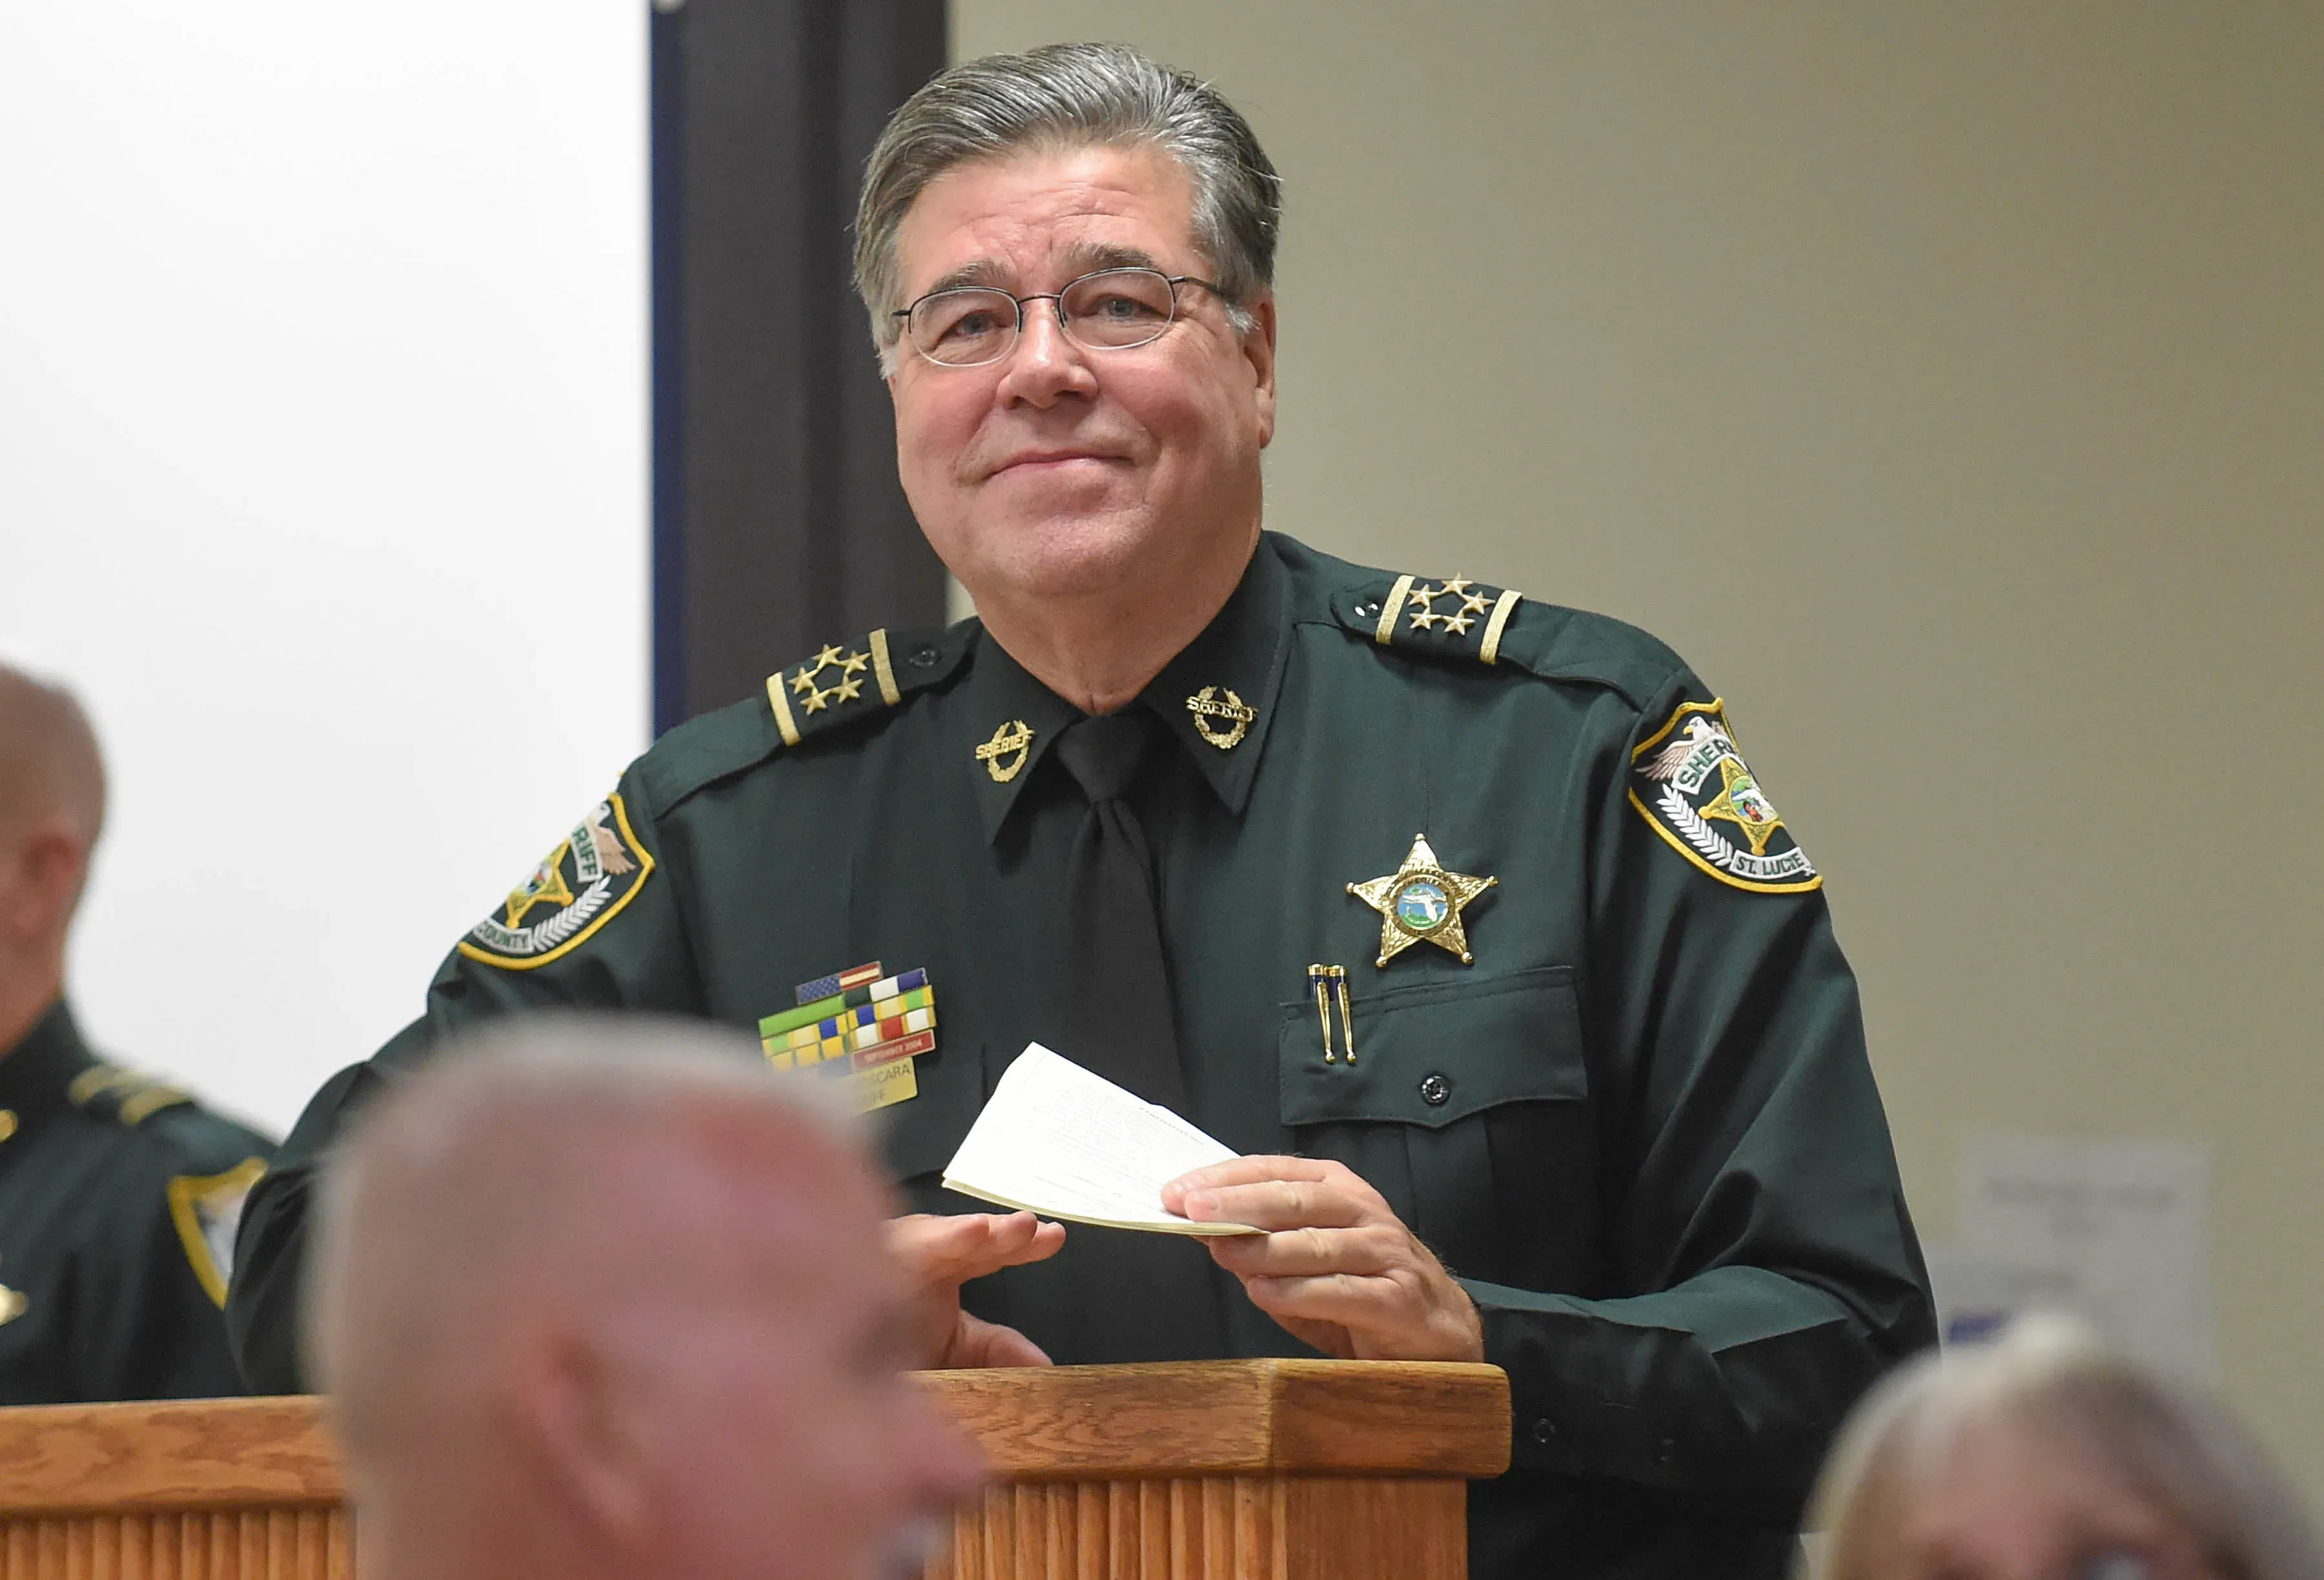 See who is giving money to each candidate in an expensive St. Lucie County sheriff election